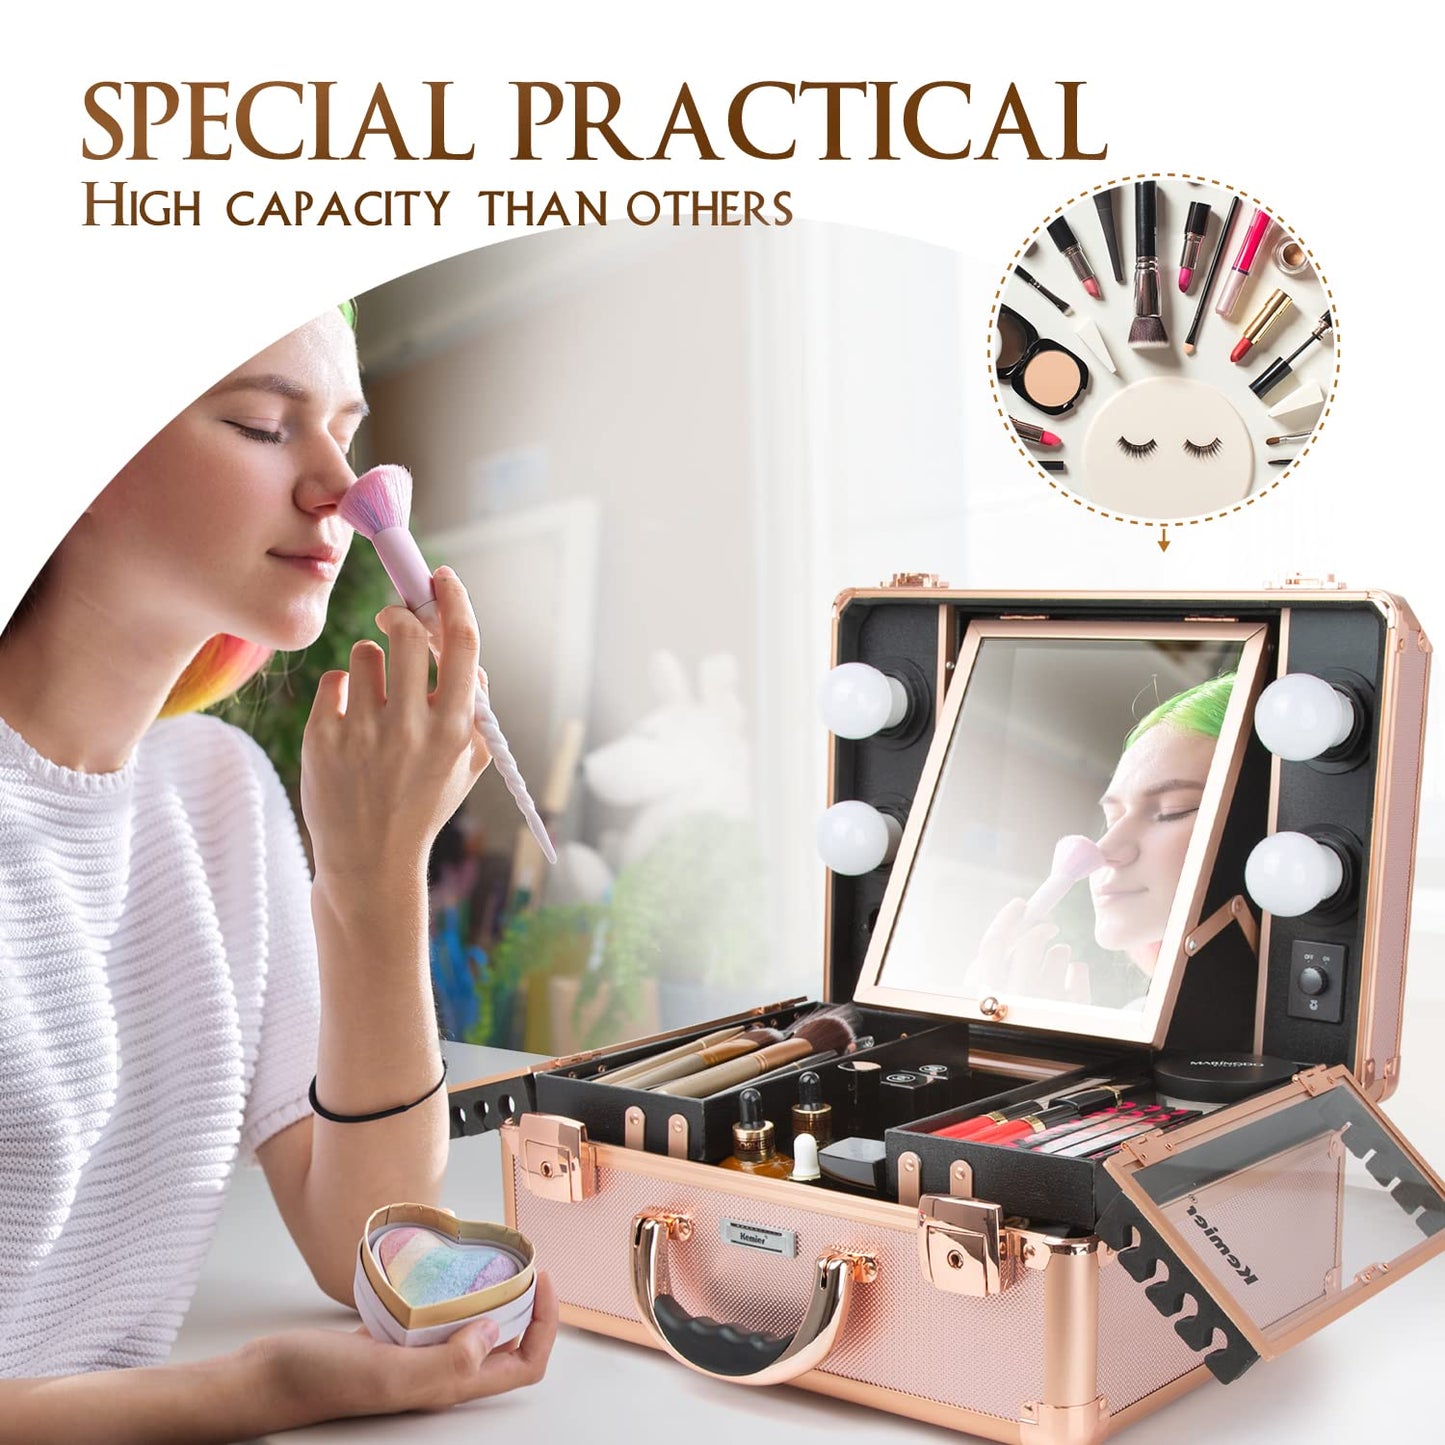 Makeup Train Case - Cosmetic Organizer Box Makeup Case with Lights and Mirror/Makeup Case with Customized Dividers/Large Makeup Artist Organizer Kit (Rose Gold)